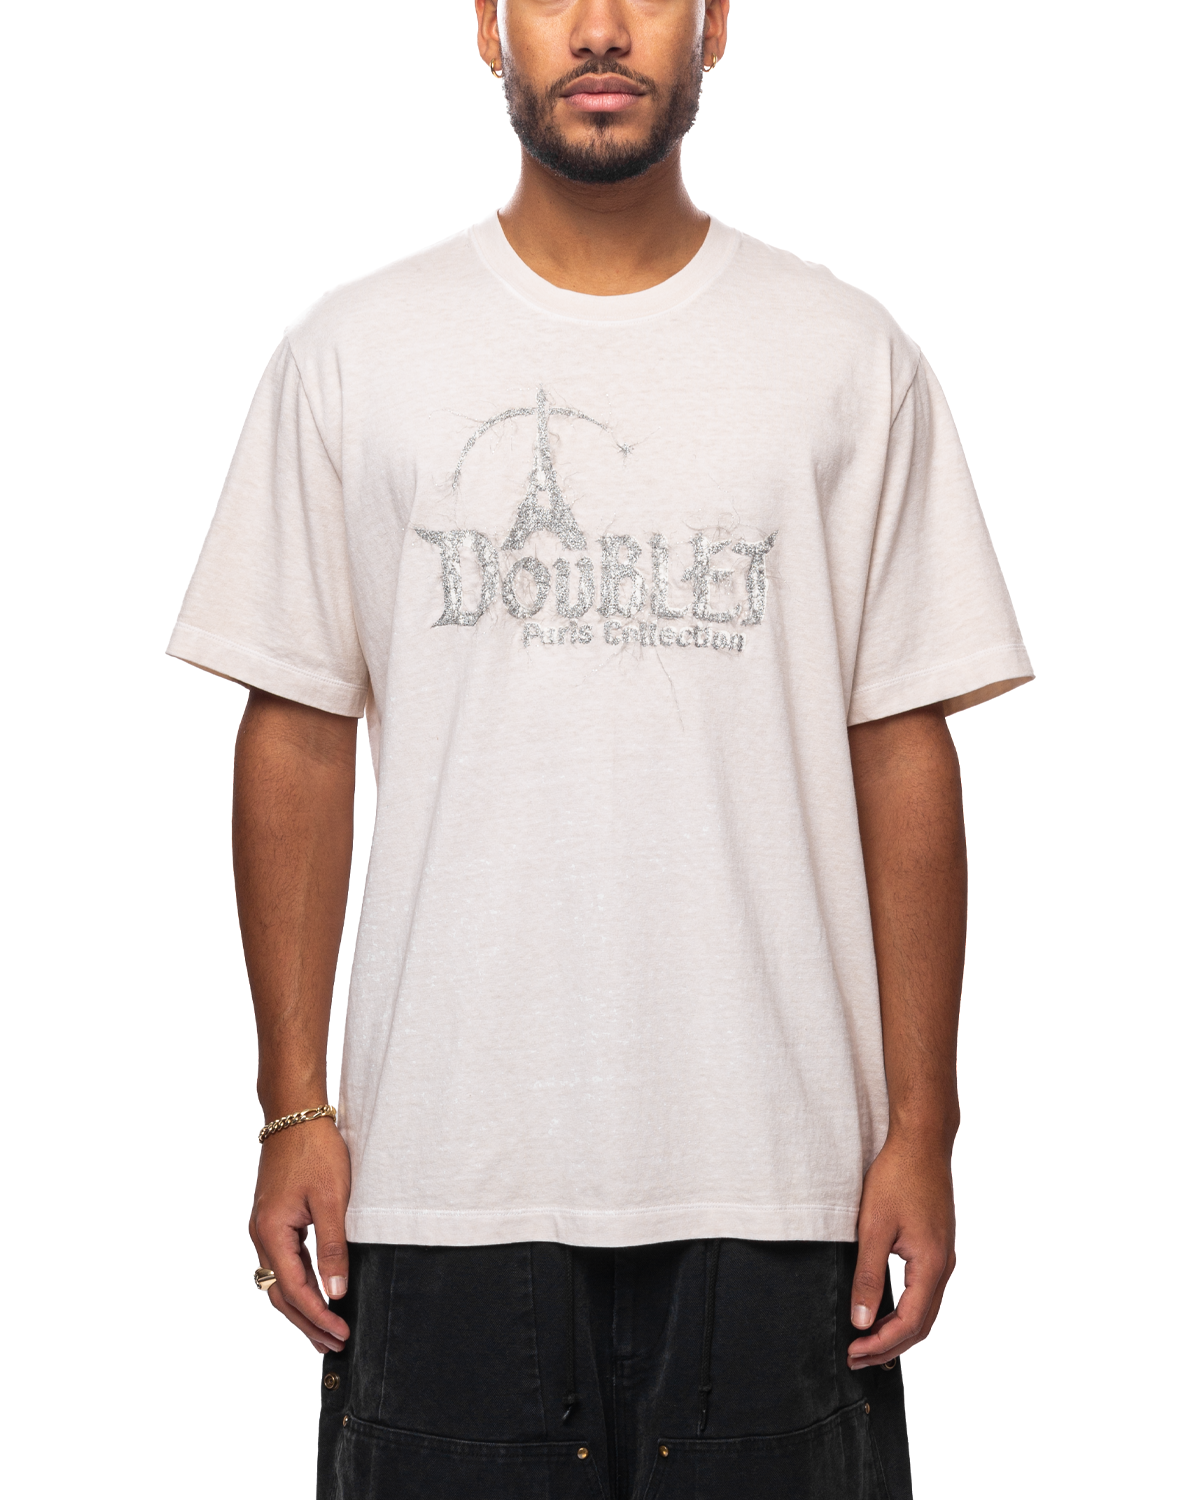 "Doubland" Embroidery T-Shirt White